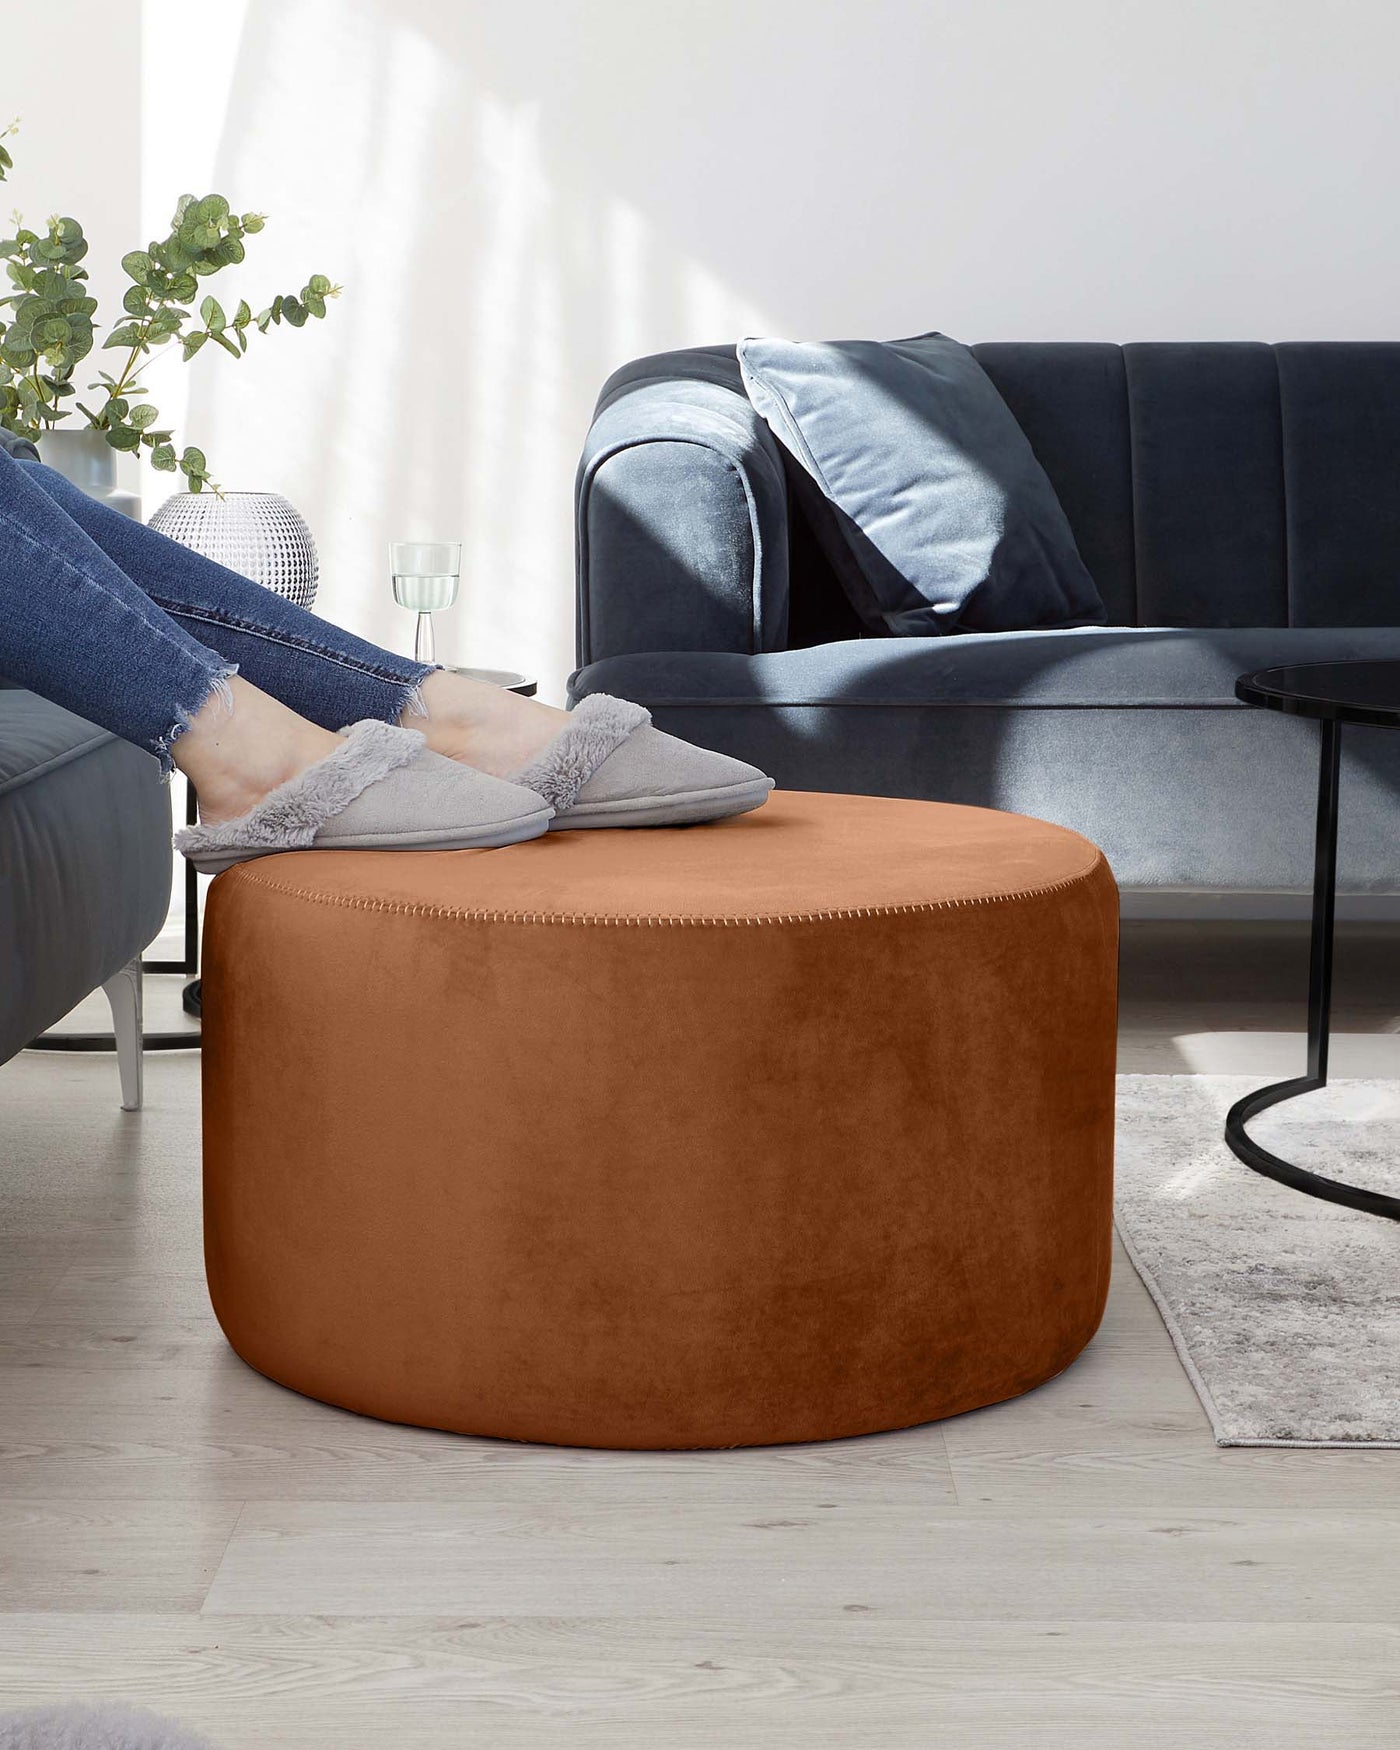 A tan round ottoman in a velvety fabric is positioned in front of a charcoal grey fabric sofa adorned with blue-grey decorative pillows. A round black side table and a light grey area rug accent the modern living space.